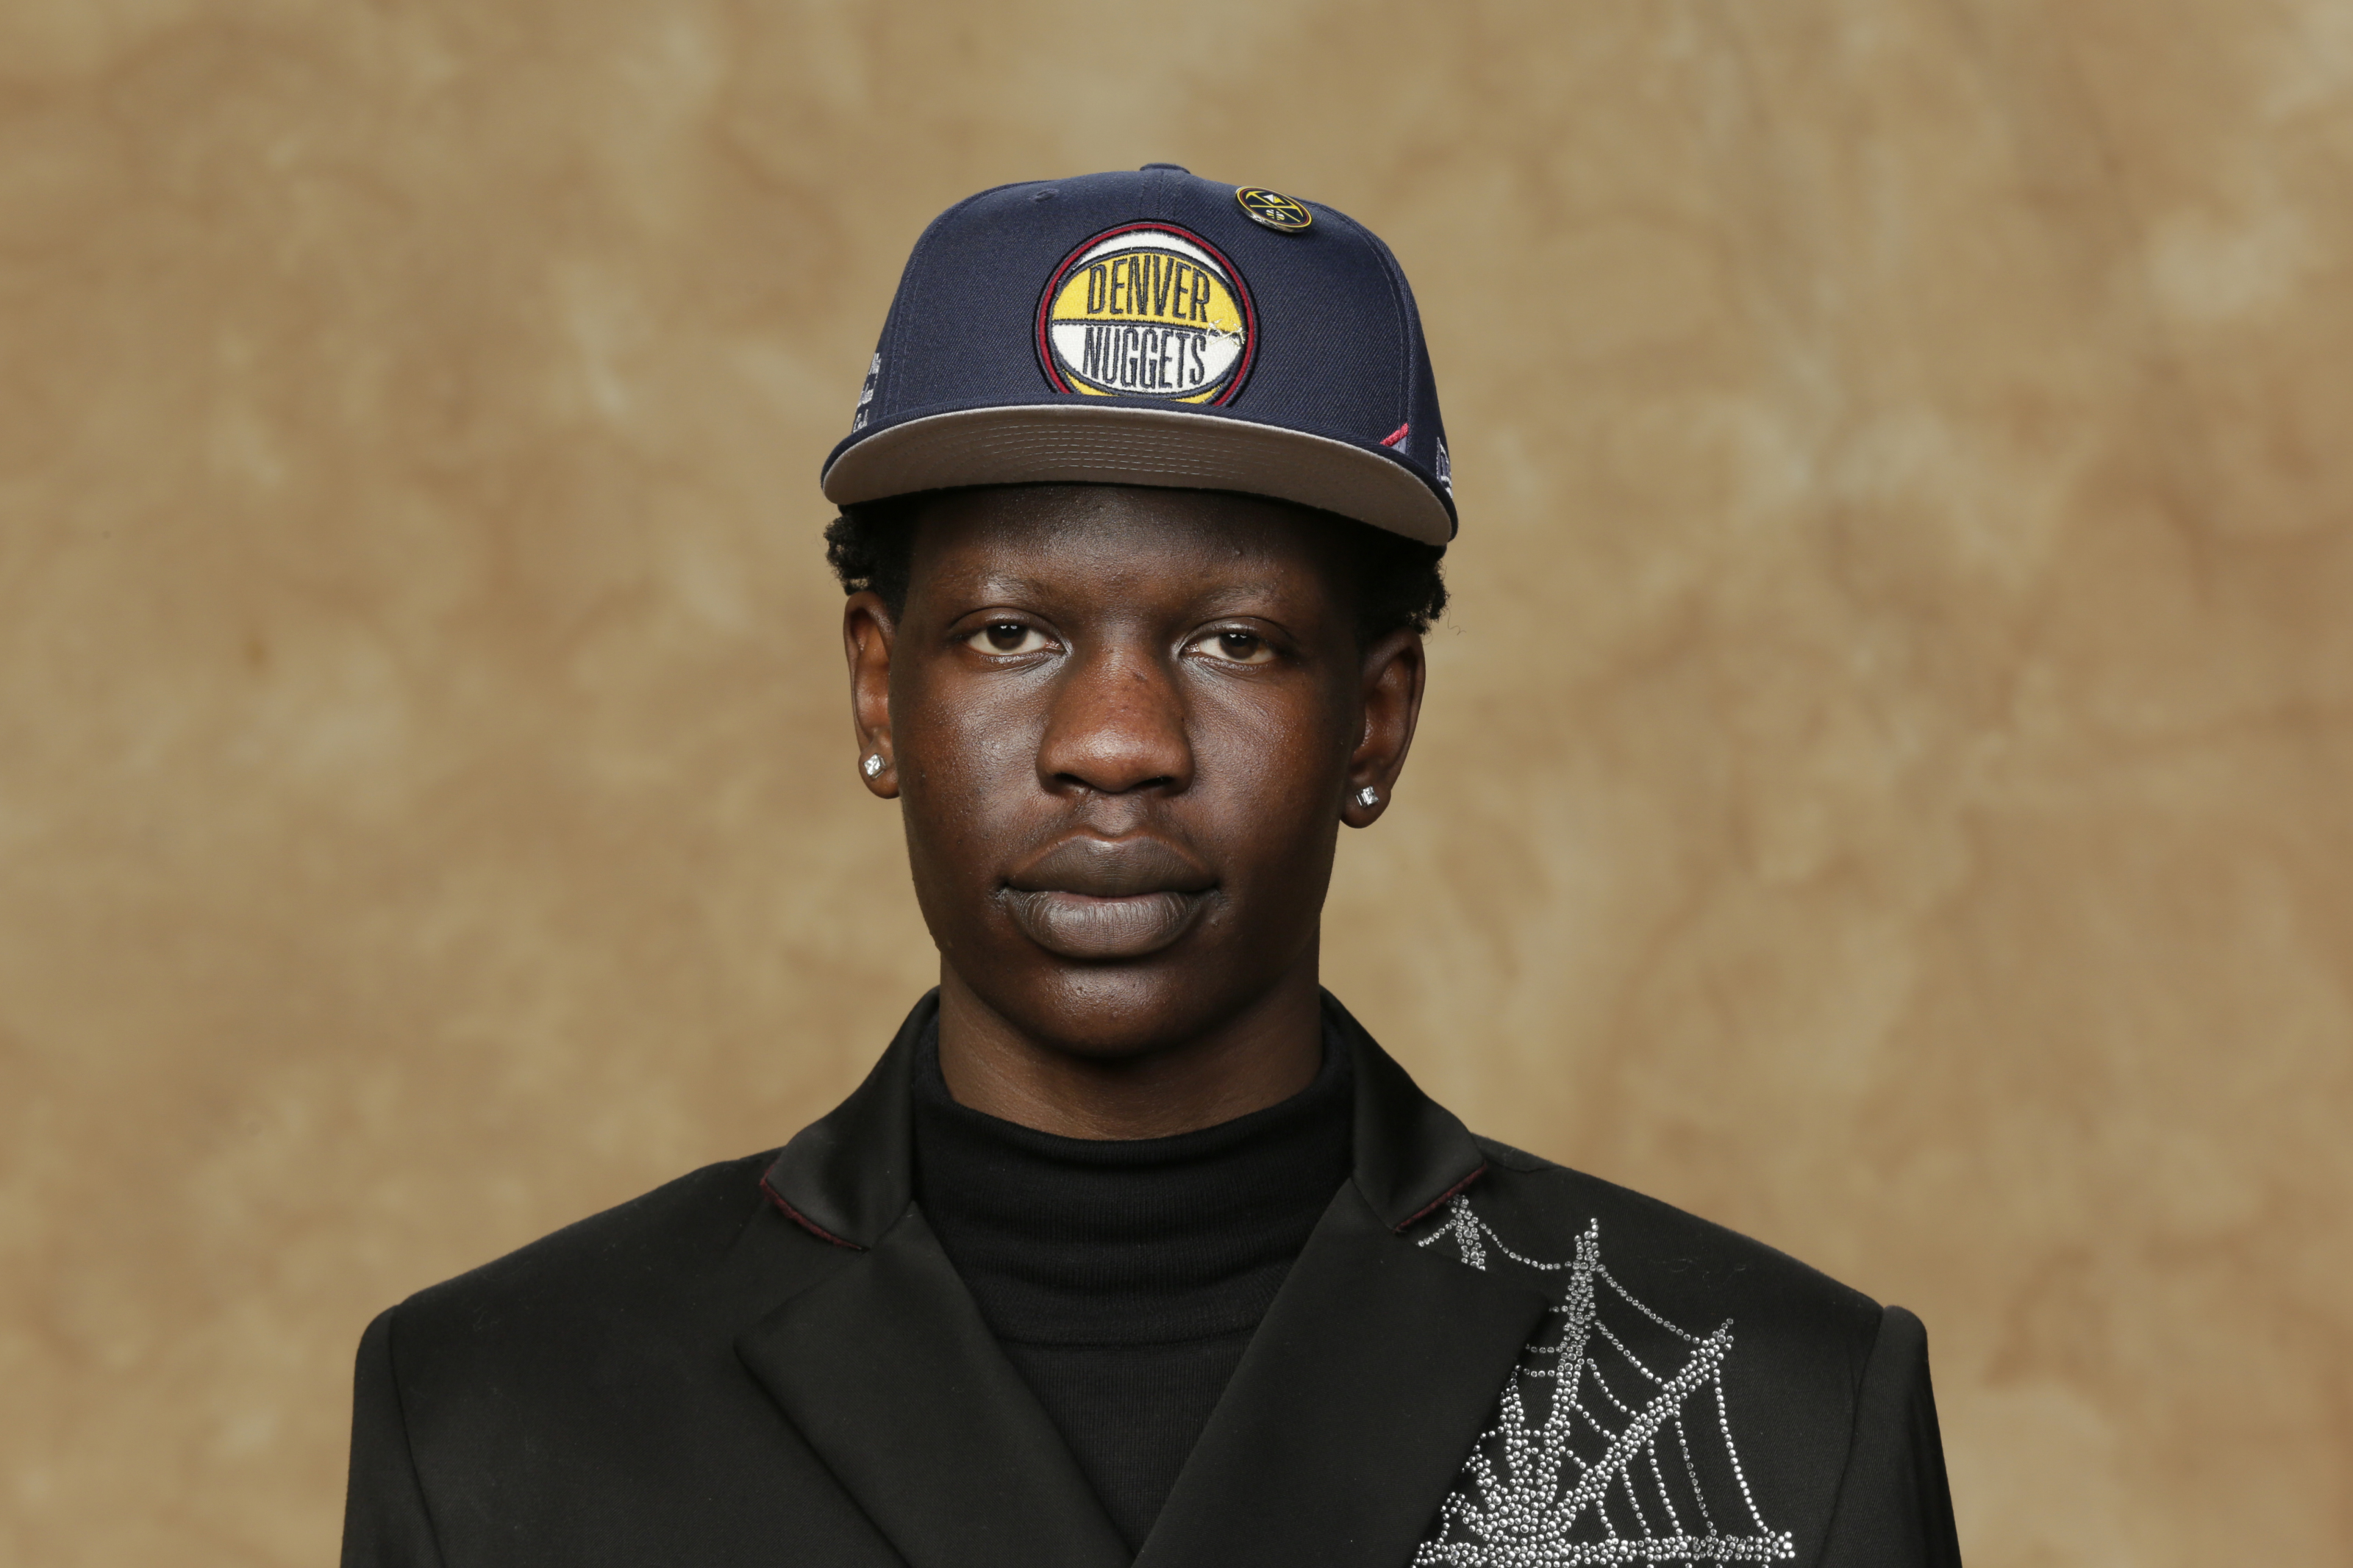 Denver Nuggets: Is rookie center Bol Bol a potential x-factor?